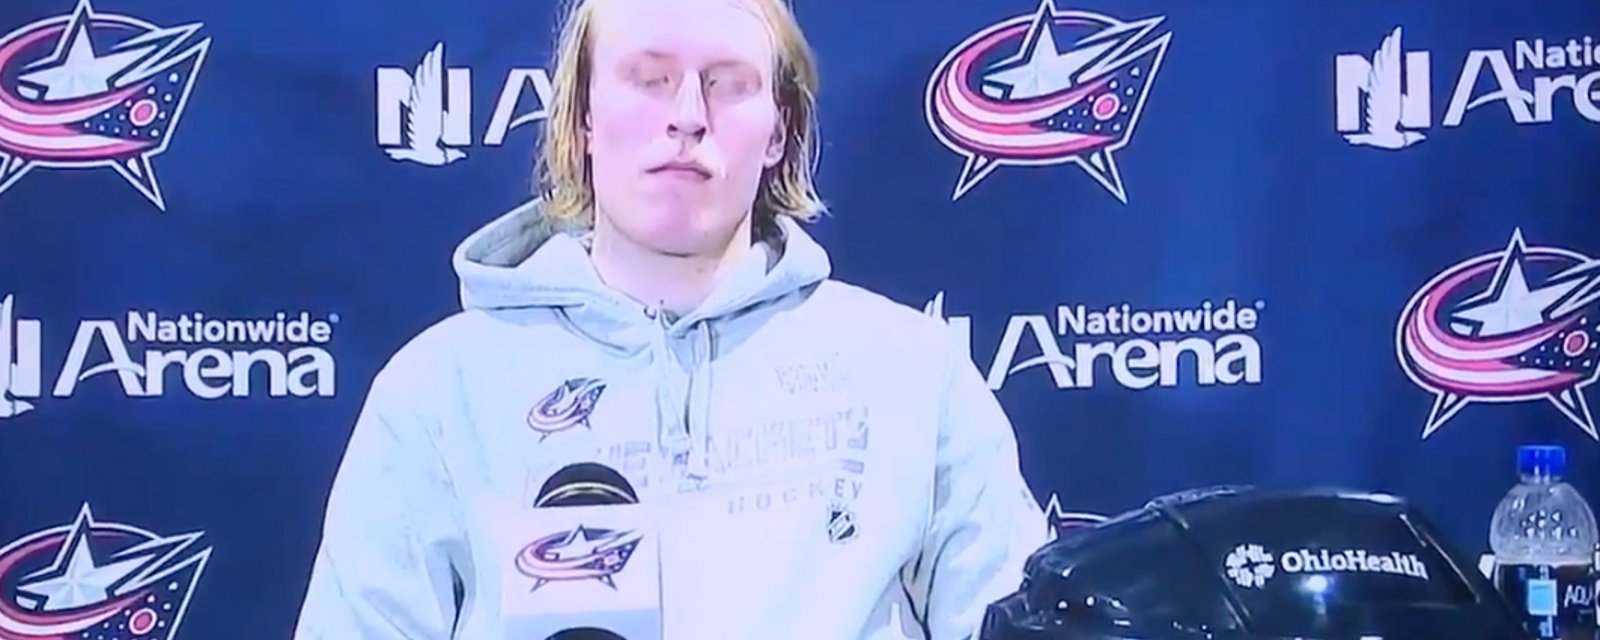 Laine breaks down after getting benched by Tortorella 